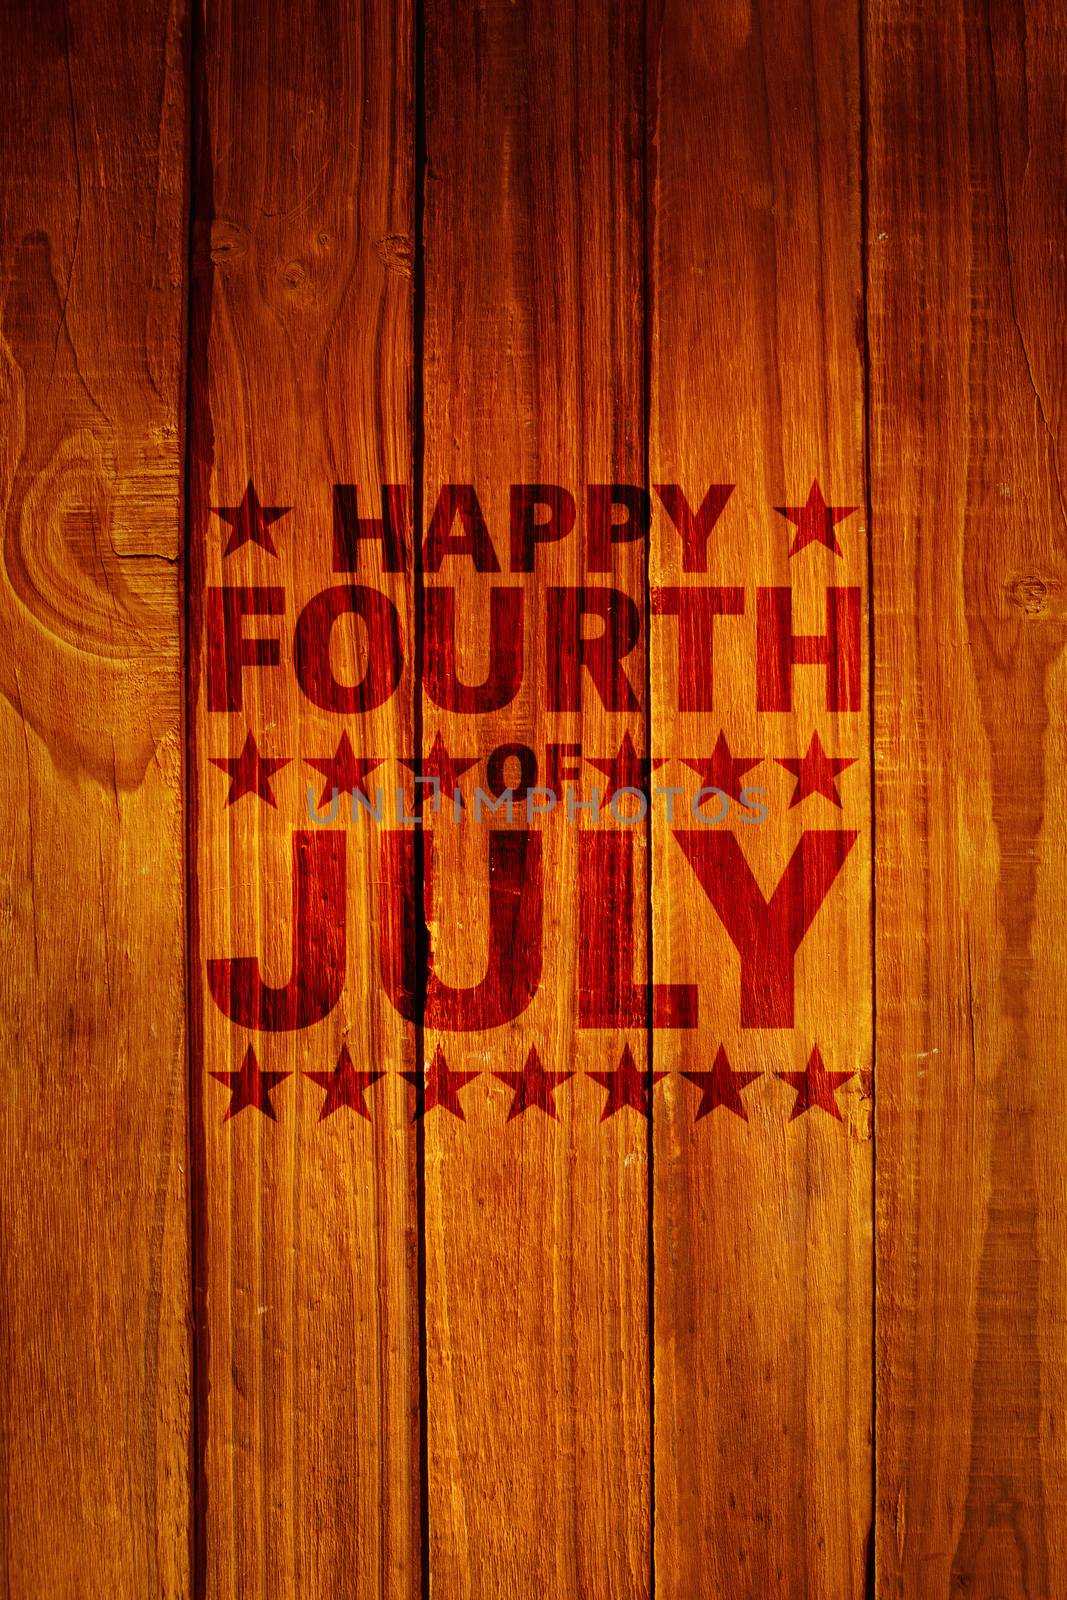 Happy fourth of july against overhead of wooden planks